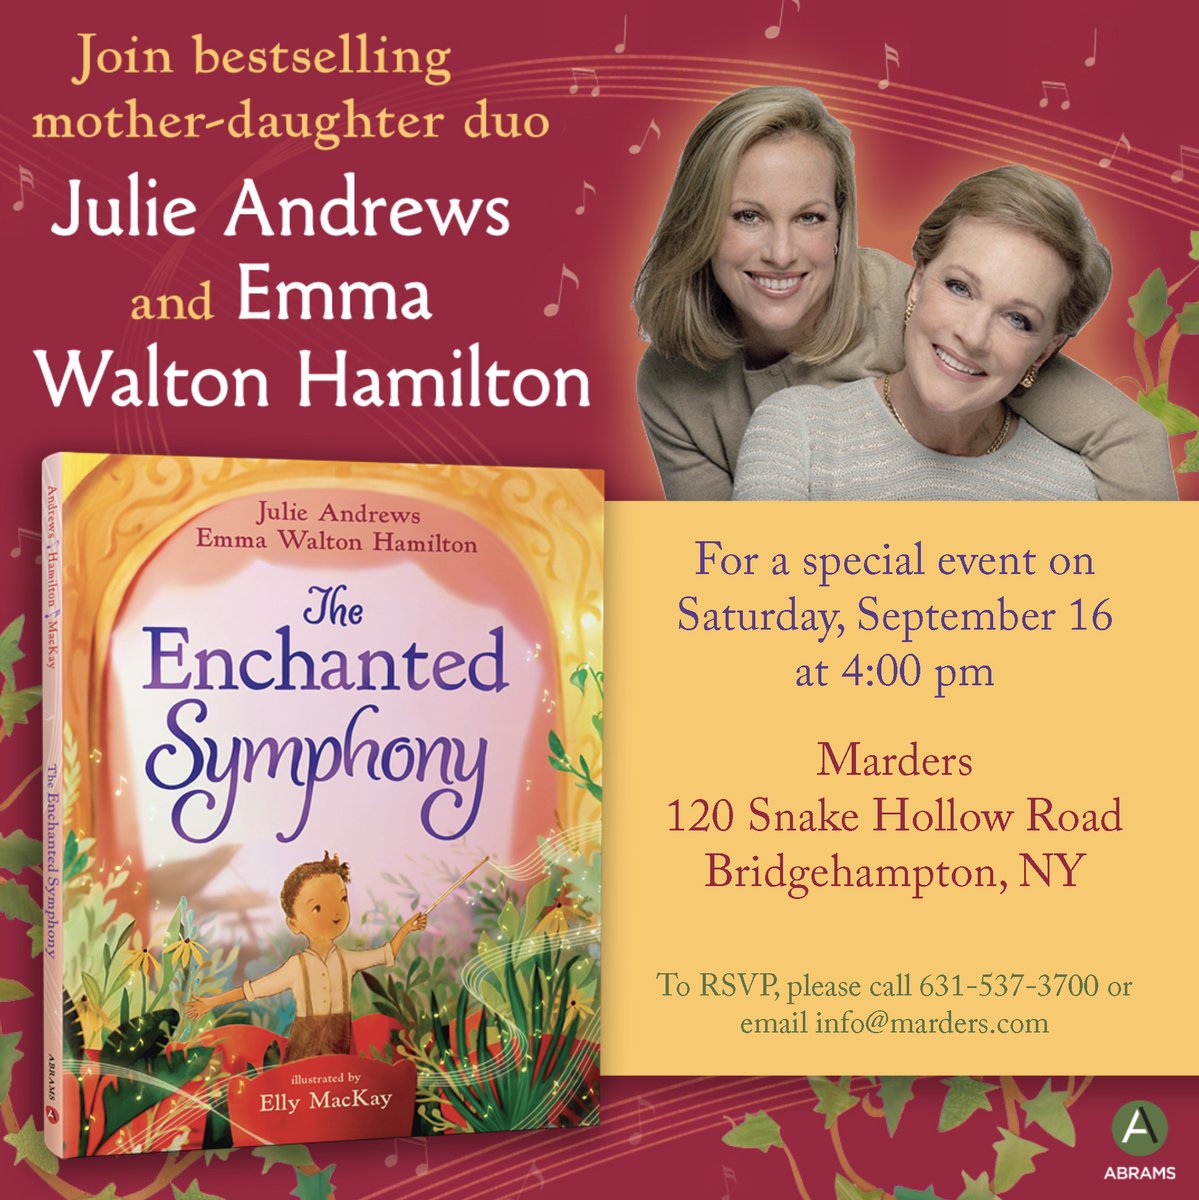 If you missed today's book talk at Bay Street, here's another chance to join Julie and Emma live - next Saturday, 09/16 at 4 PM @mardersnursery in Bridgehampton, NY. Limited seating - be sure to reserve! Signed books available from @southsagbooks - Team Julie